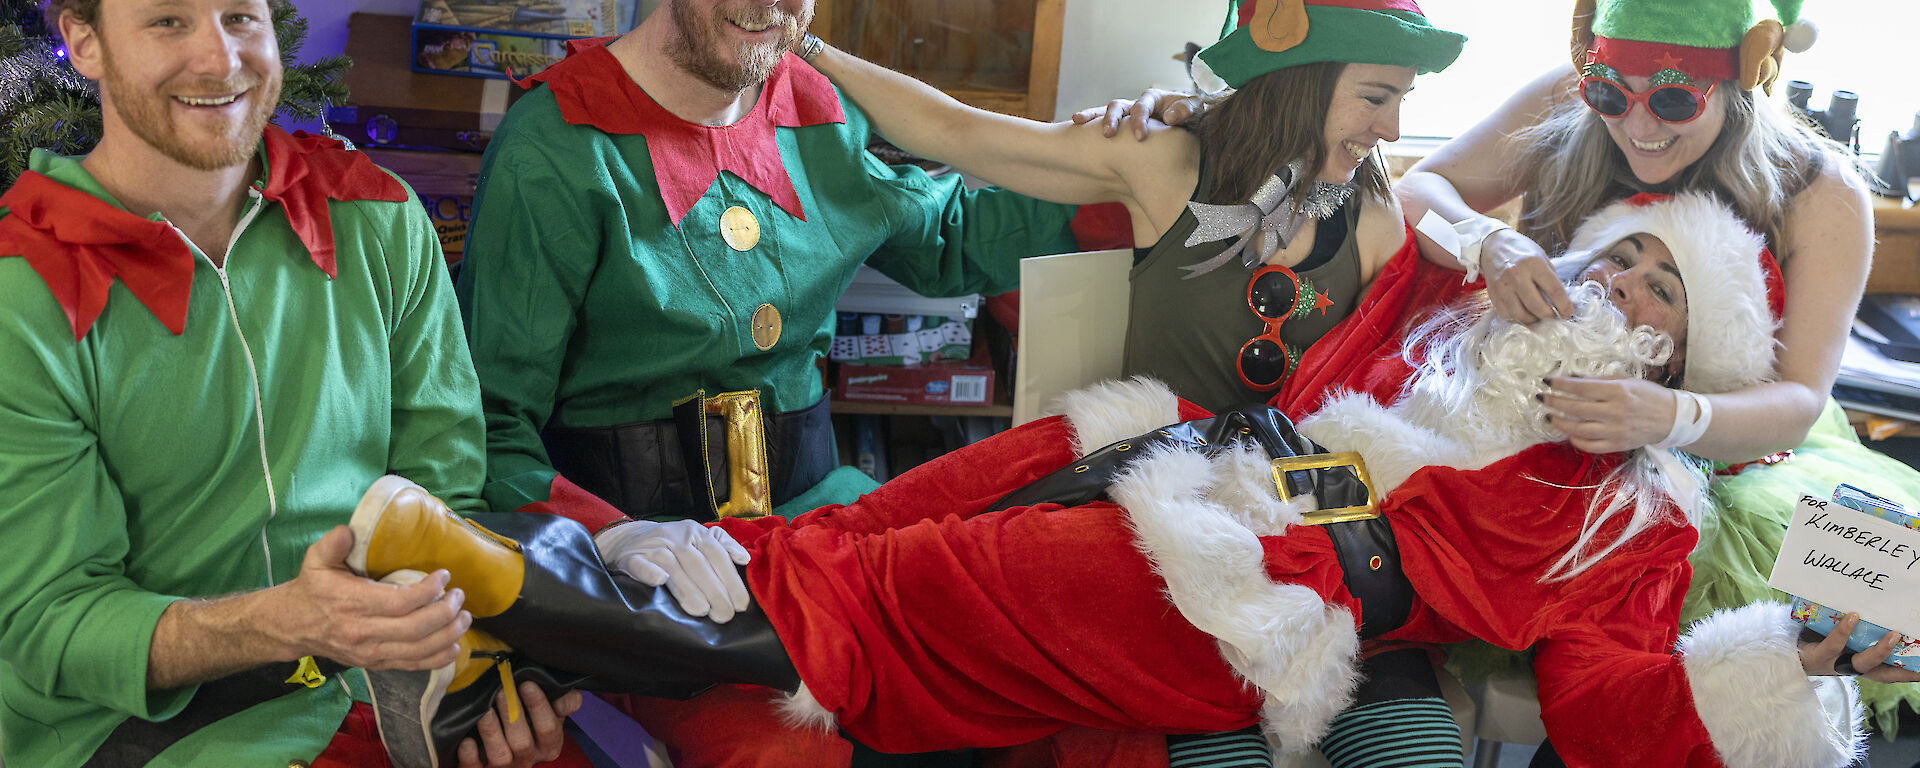 Five people dressed as elves and Santa relax after Christmas lunch